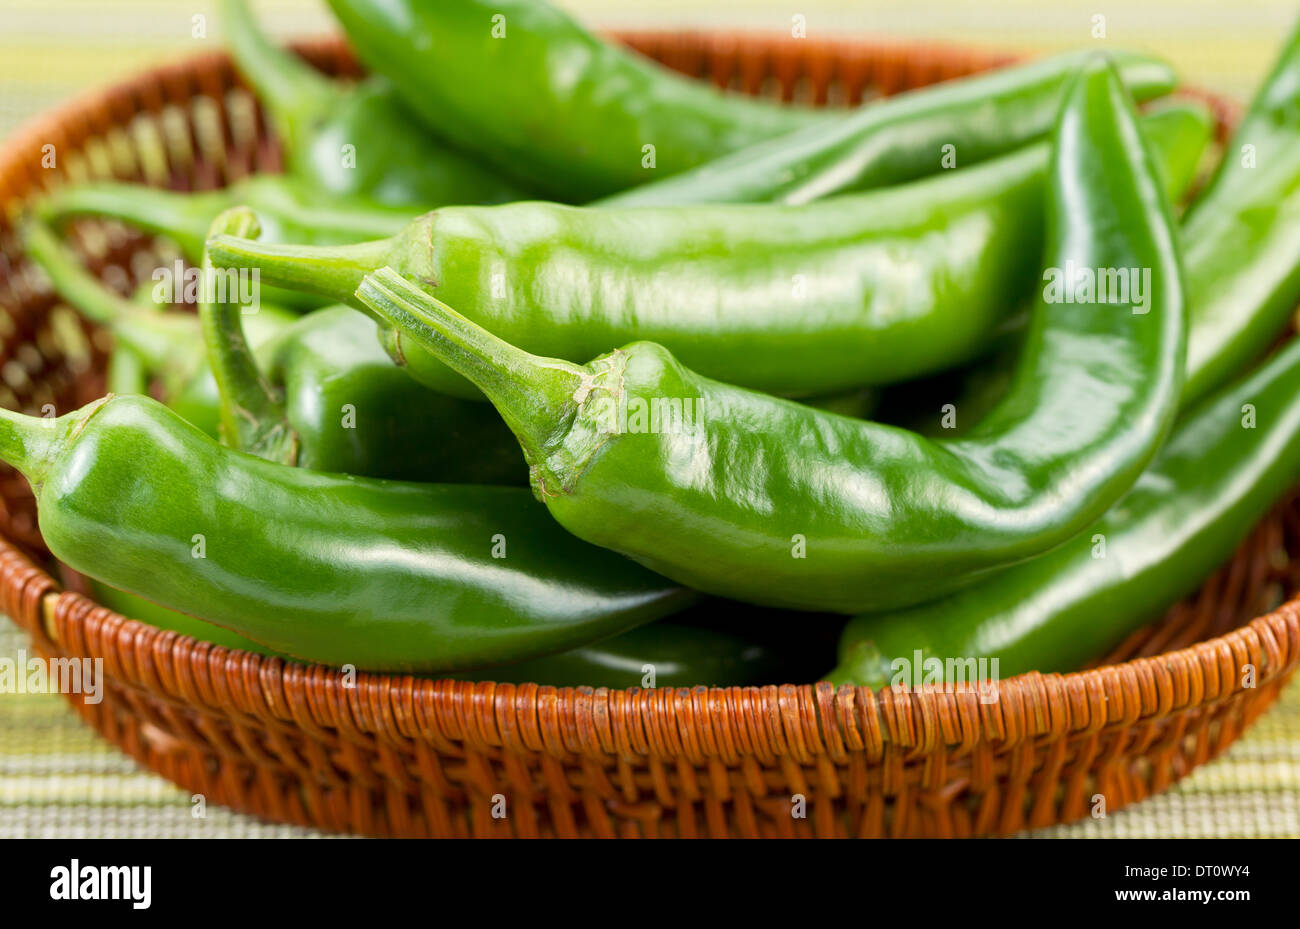 Closeup horizontal photo of fresh Korean Green Peppers in basket with textured table cloth underneath Stock Photo